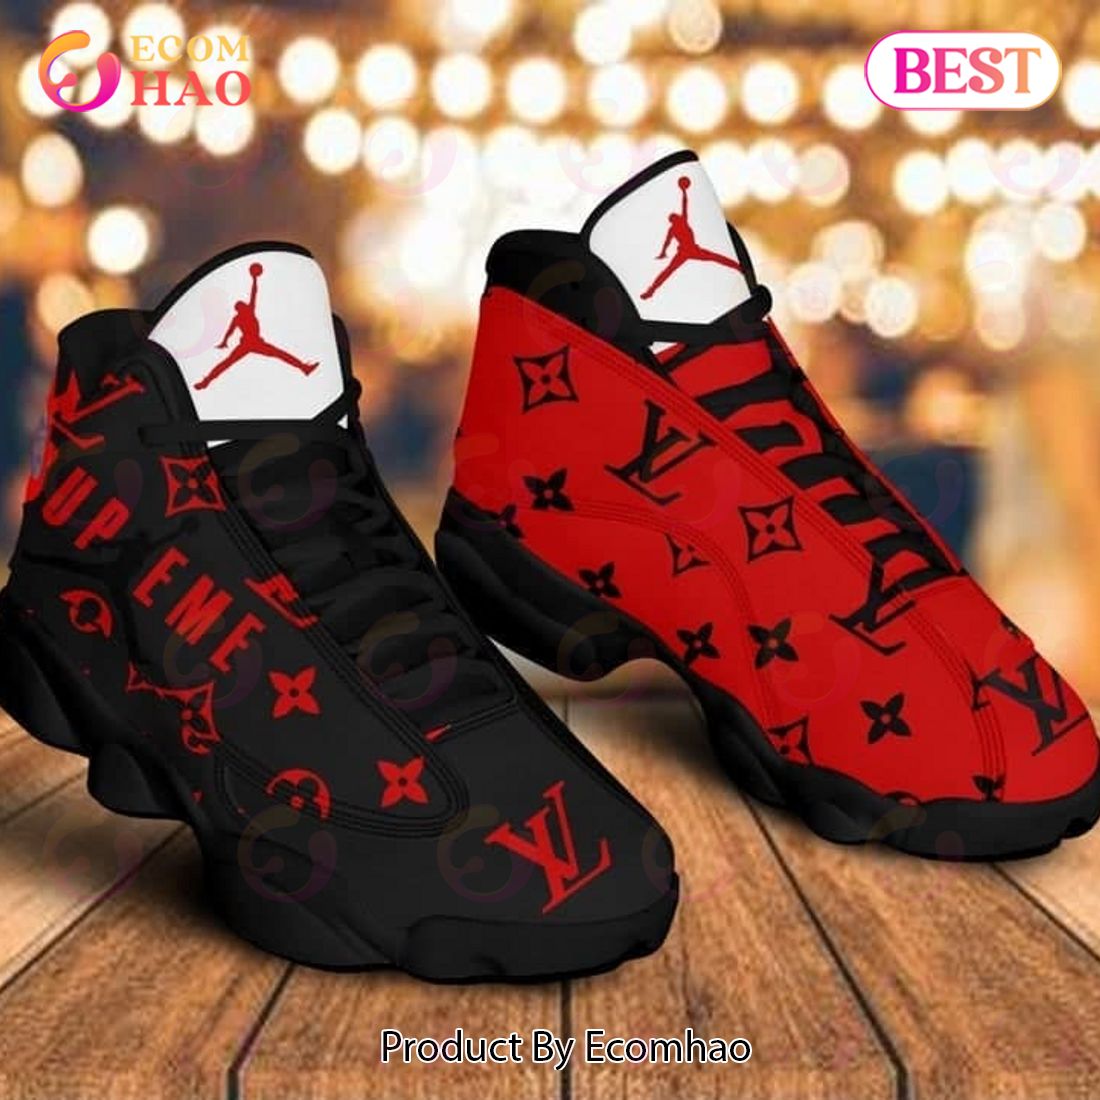 Louis Vuitton Air Jordan 13 Red And Black LV Shoes, Sneakers - Ecomhao Store